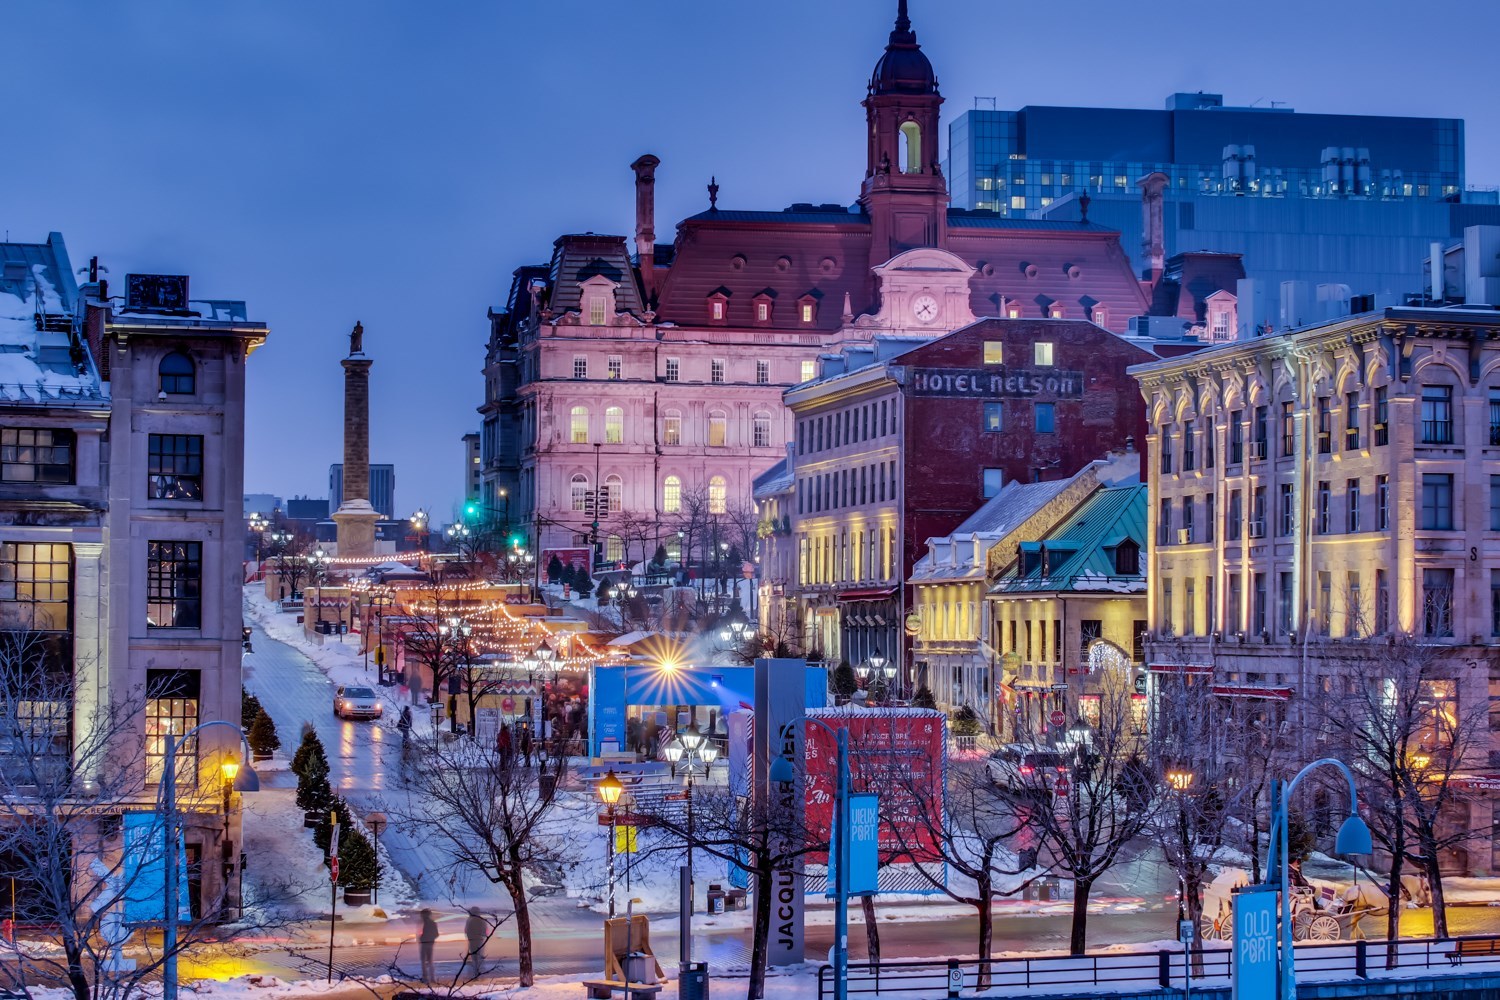 Old Montreal's Winter Village of Lights, Giant Animal Sculptures and a